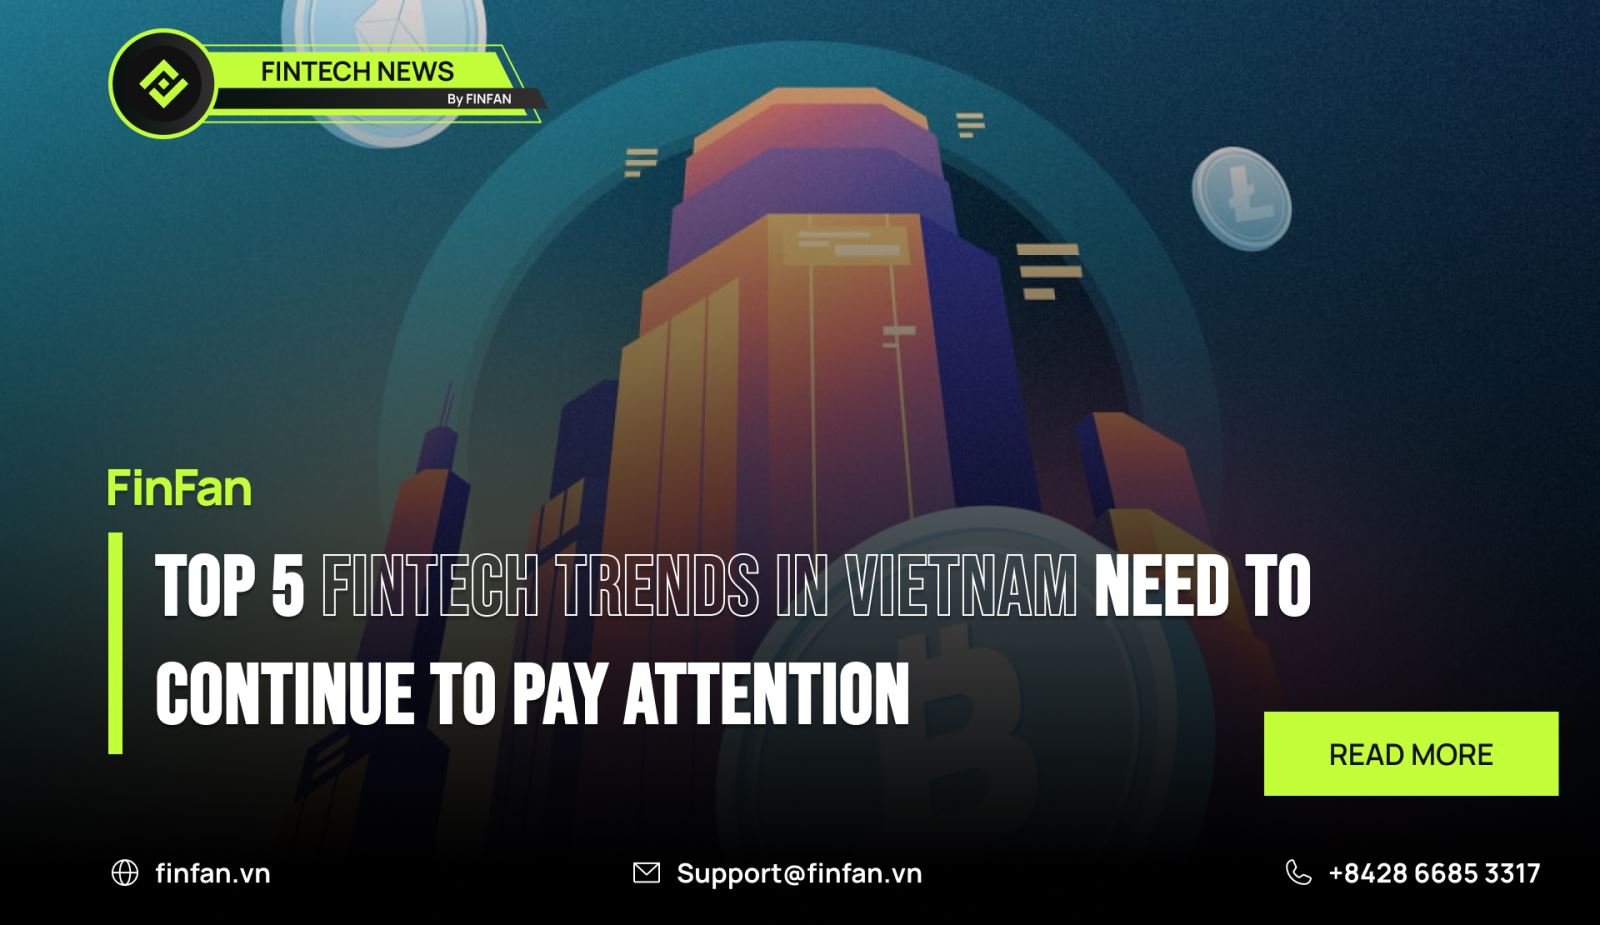 Top 5 Fintech Trends in Vietnam Need to Continue to Pay Attention